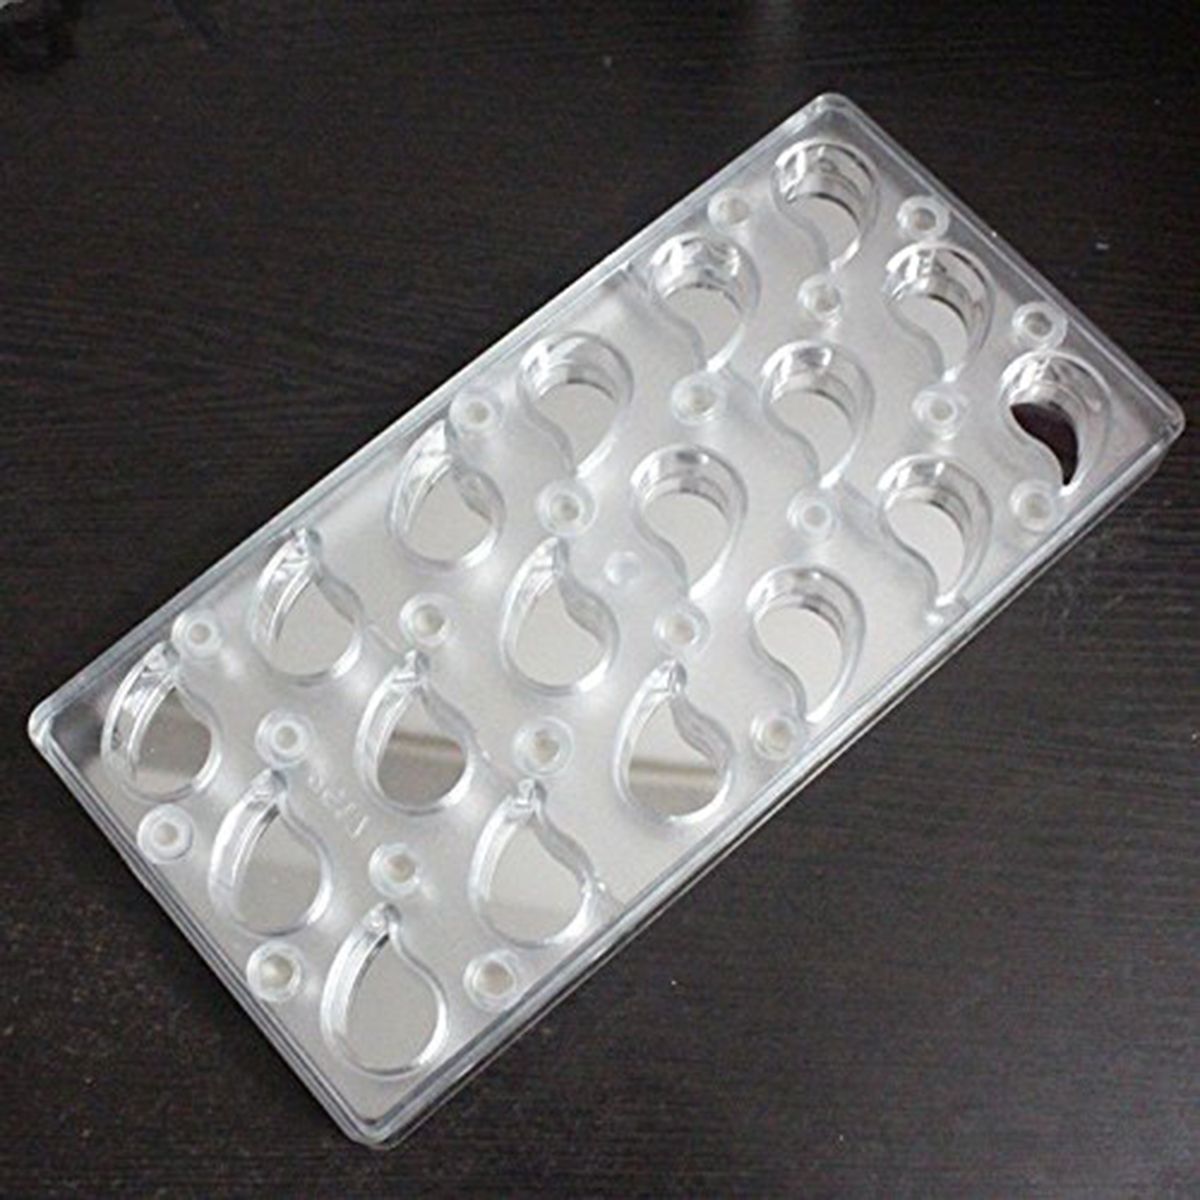 Polycarbonate-Crescent-Droplets-Comma-Chocolate-Mold-Shape-Candy-Cake-DIY-1684956